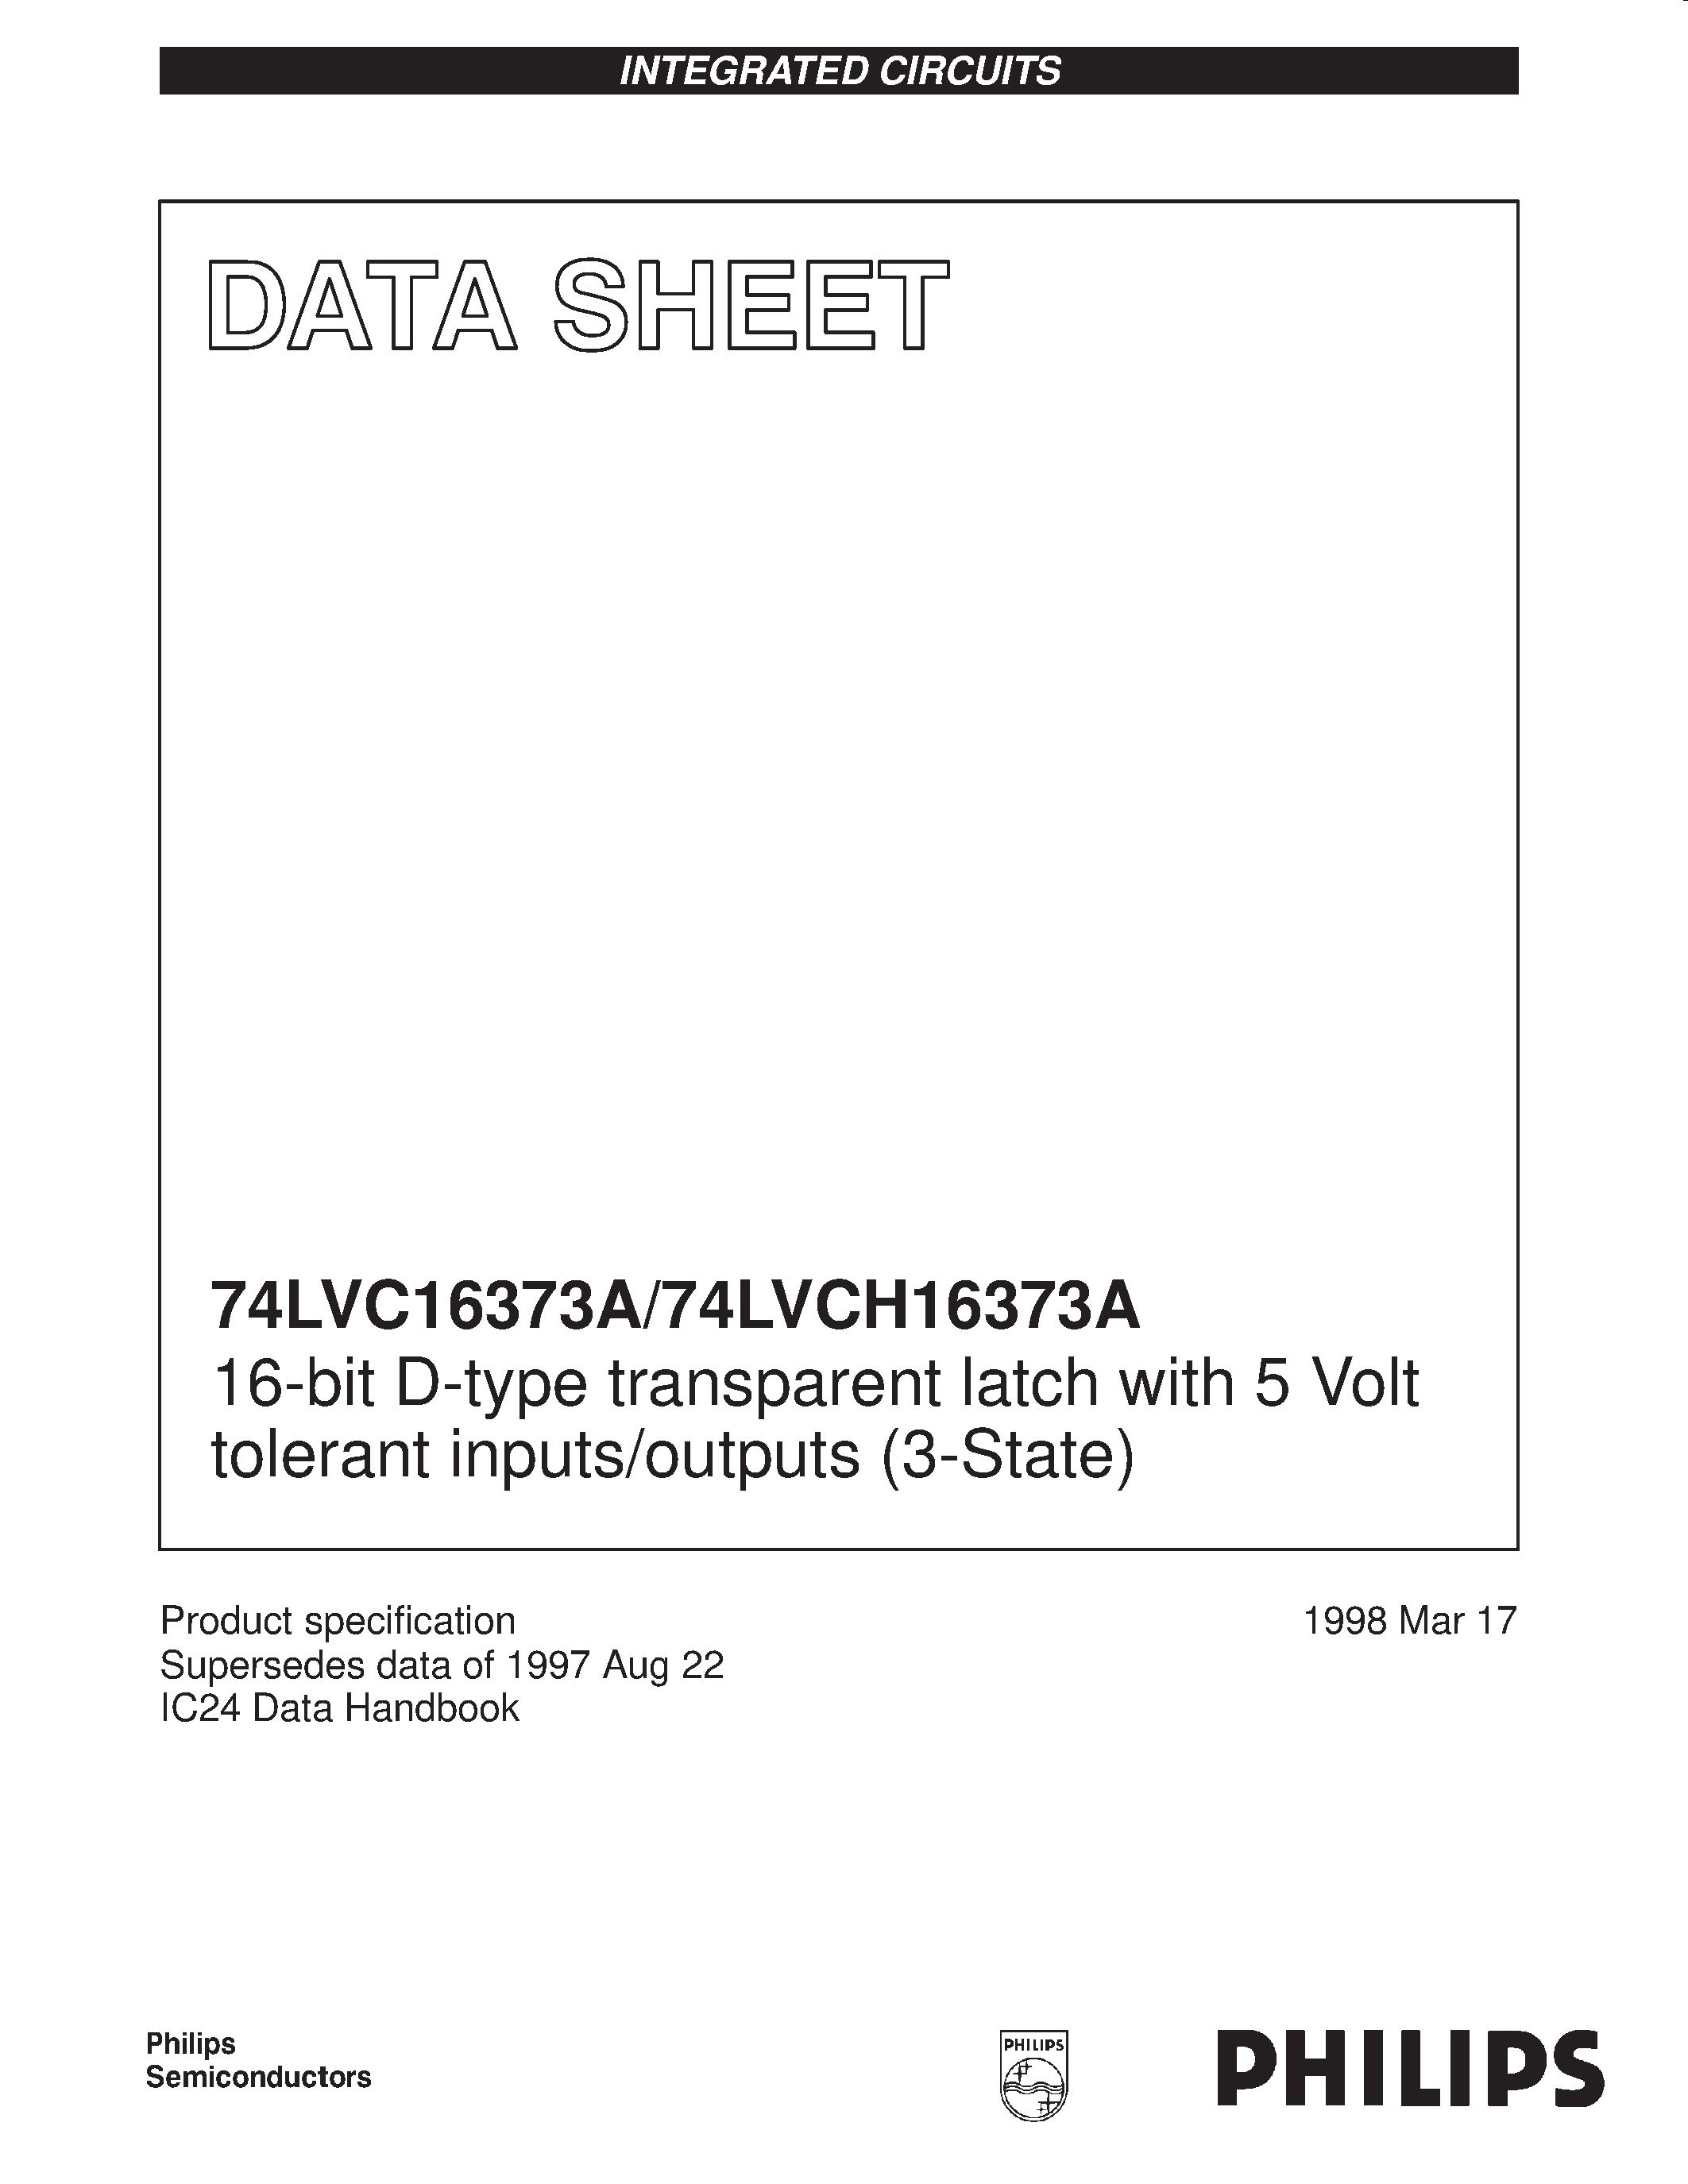 Datasheet VC16373ADGG - 16-bit D-type transparent latch with 5 Volt tolerant inputs/outputs 3-State page 1